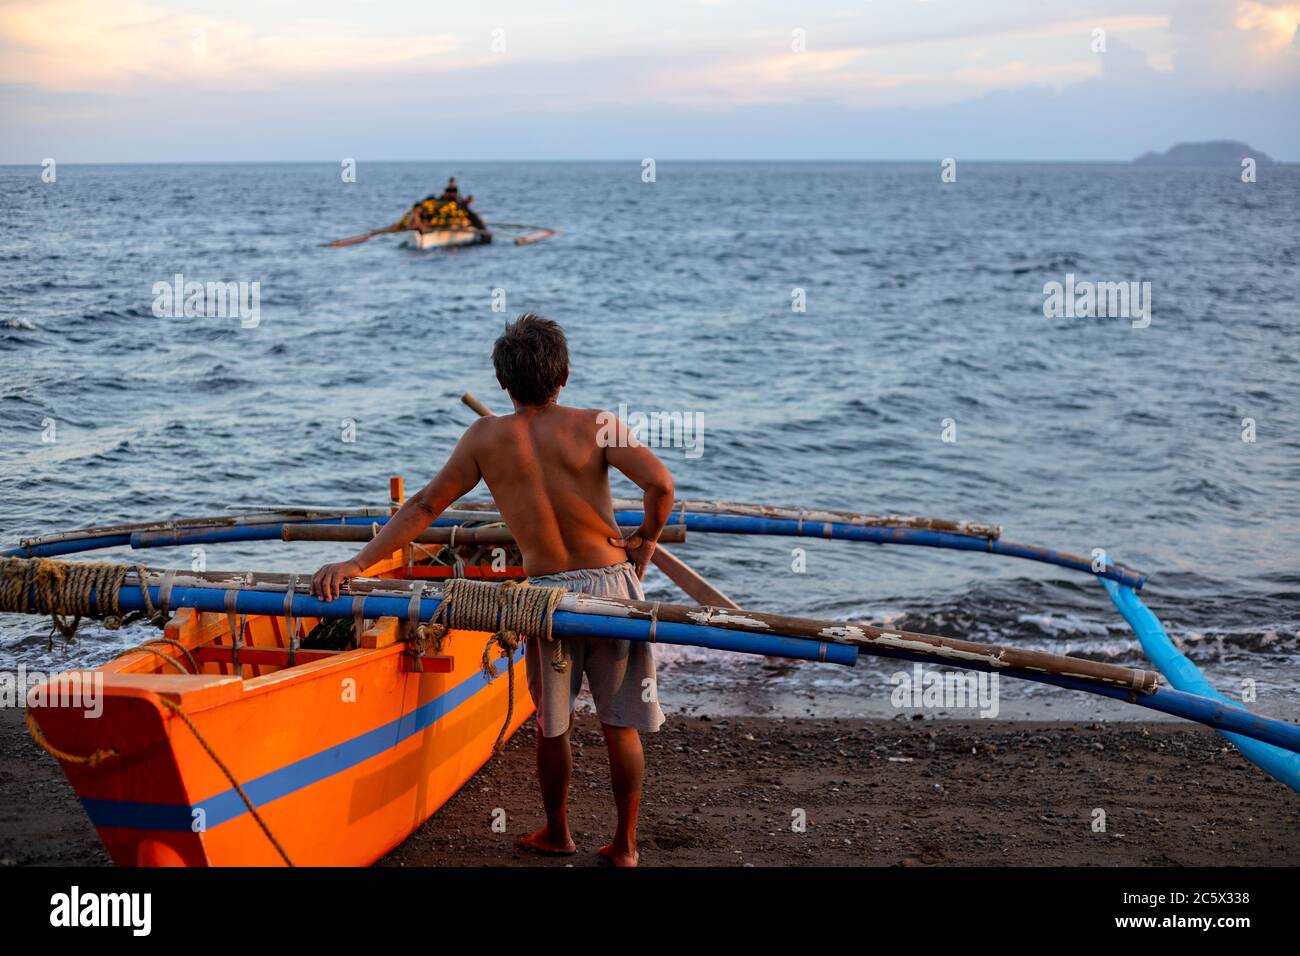 Dumaguete, the Philippines - 23 Mar 2020: local fishermen preparing for night fishing. Native lifestyle of filipino. Tropical island daily lifestyle. Stock Photo